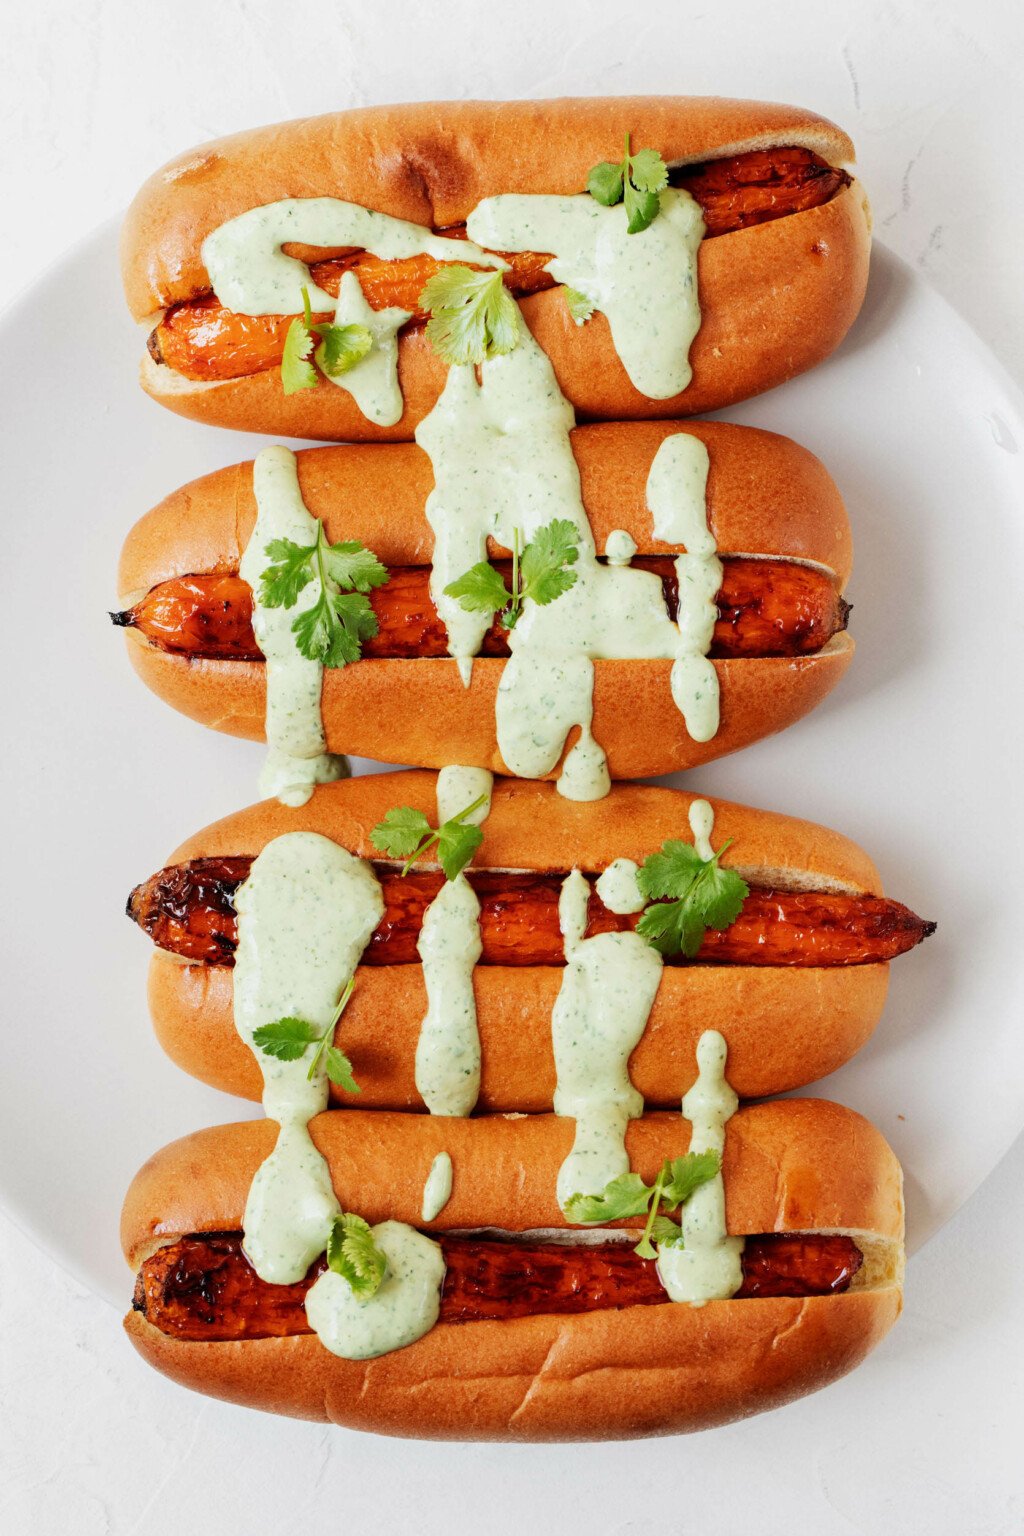 A white plate holds roasted carrots that have been arranged in hot dog buns and topped with a green sauce.